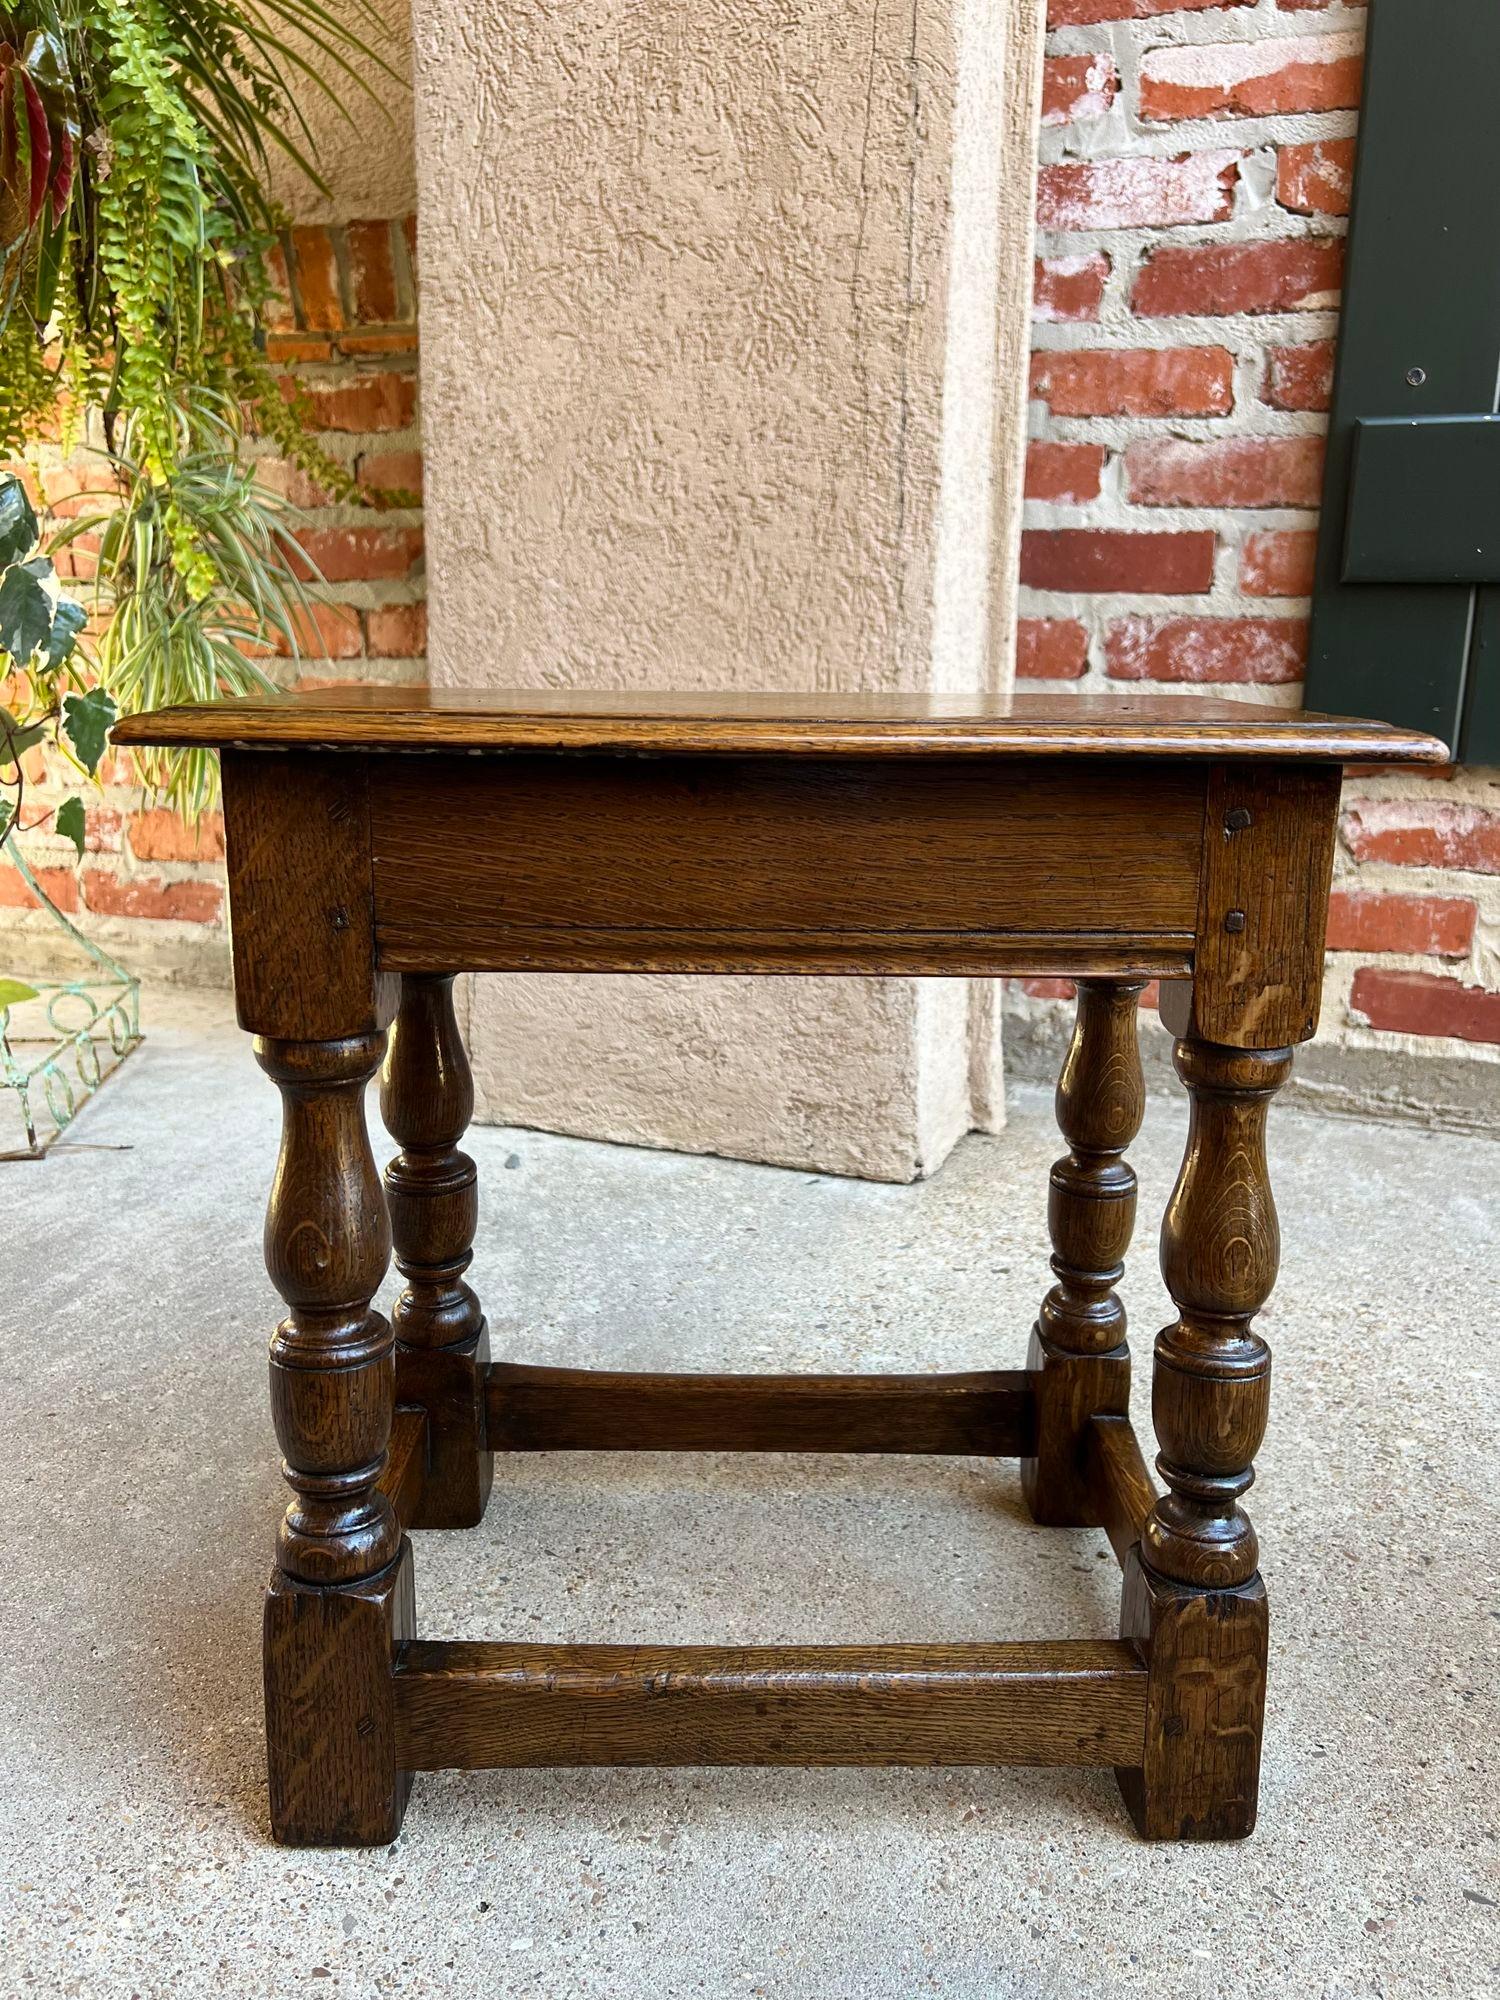 British 19th century English Oak Joint Stool Pegged Bench Display Stand For Sale